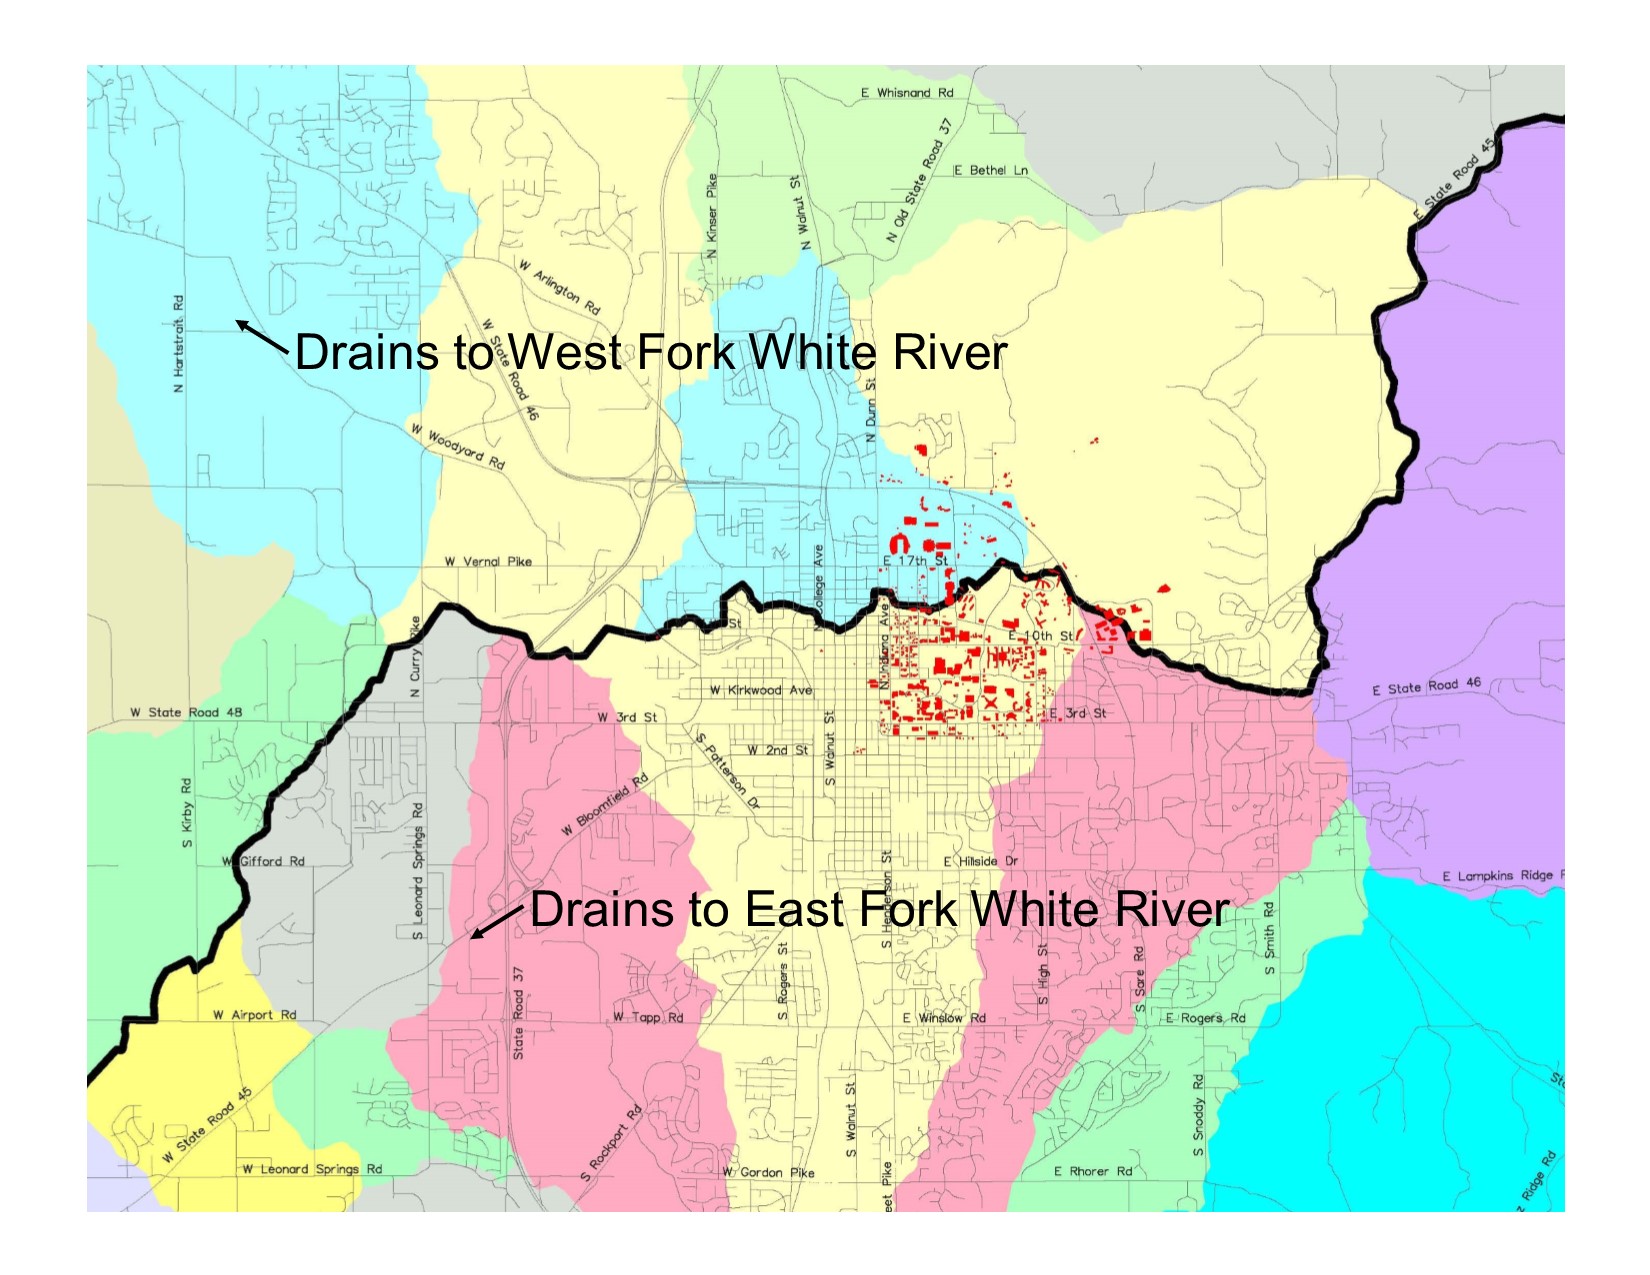 Bloomington's Two Main Watersheds